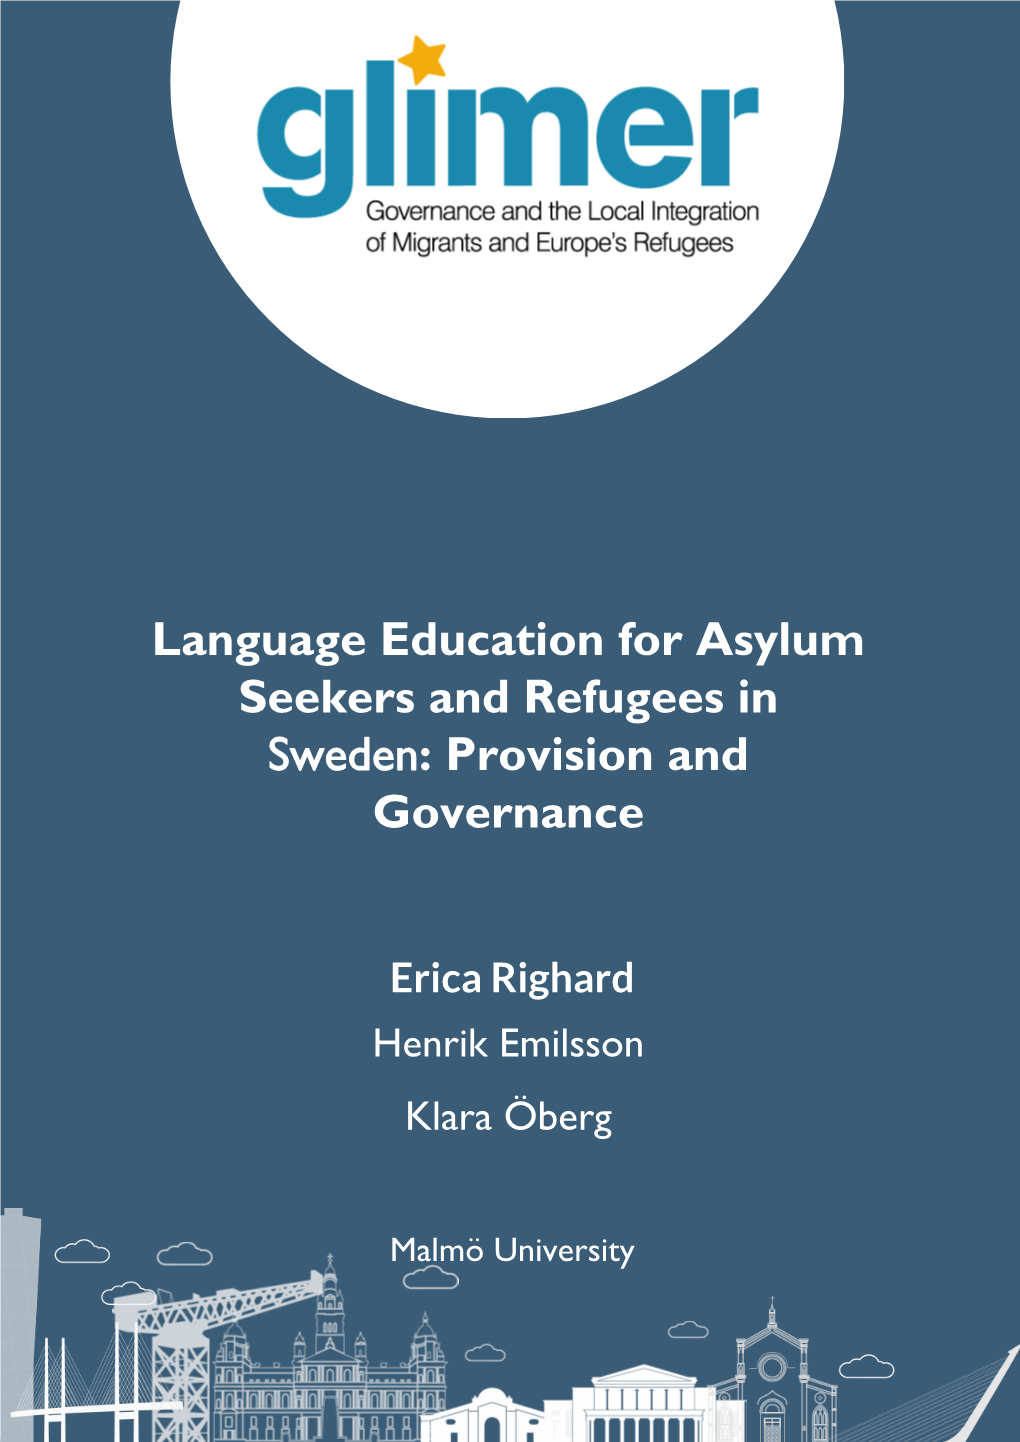 Language Education for Asylum Seekers and Refugees in Sweden: Provision and Governance